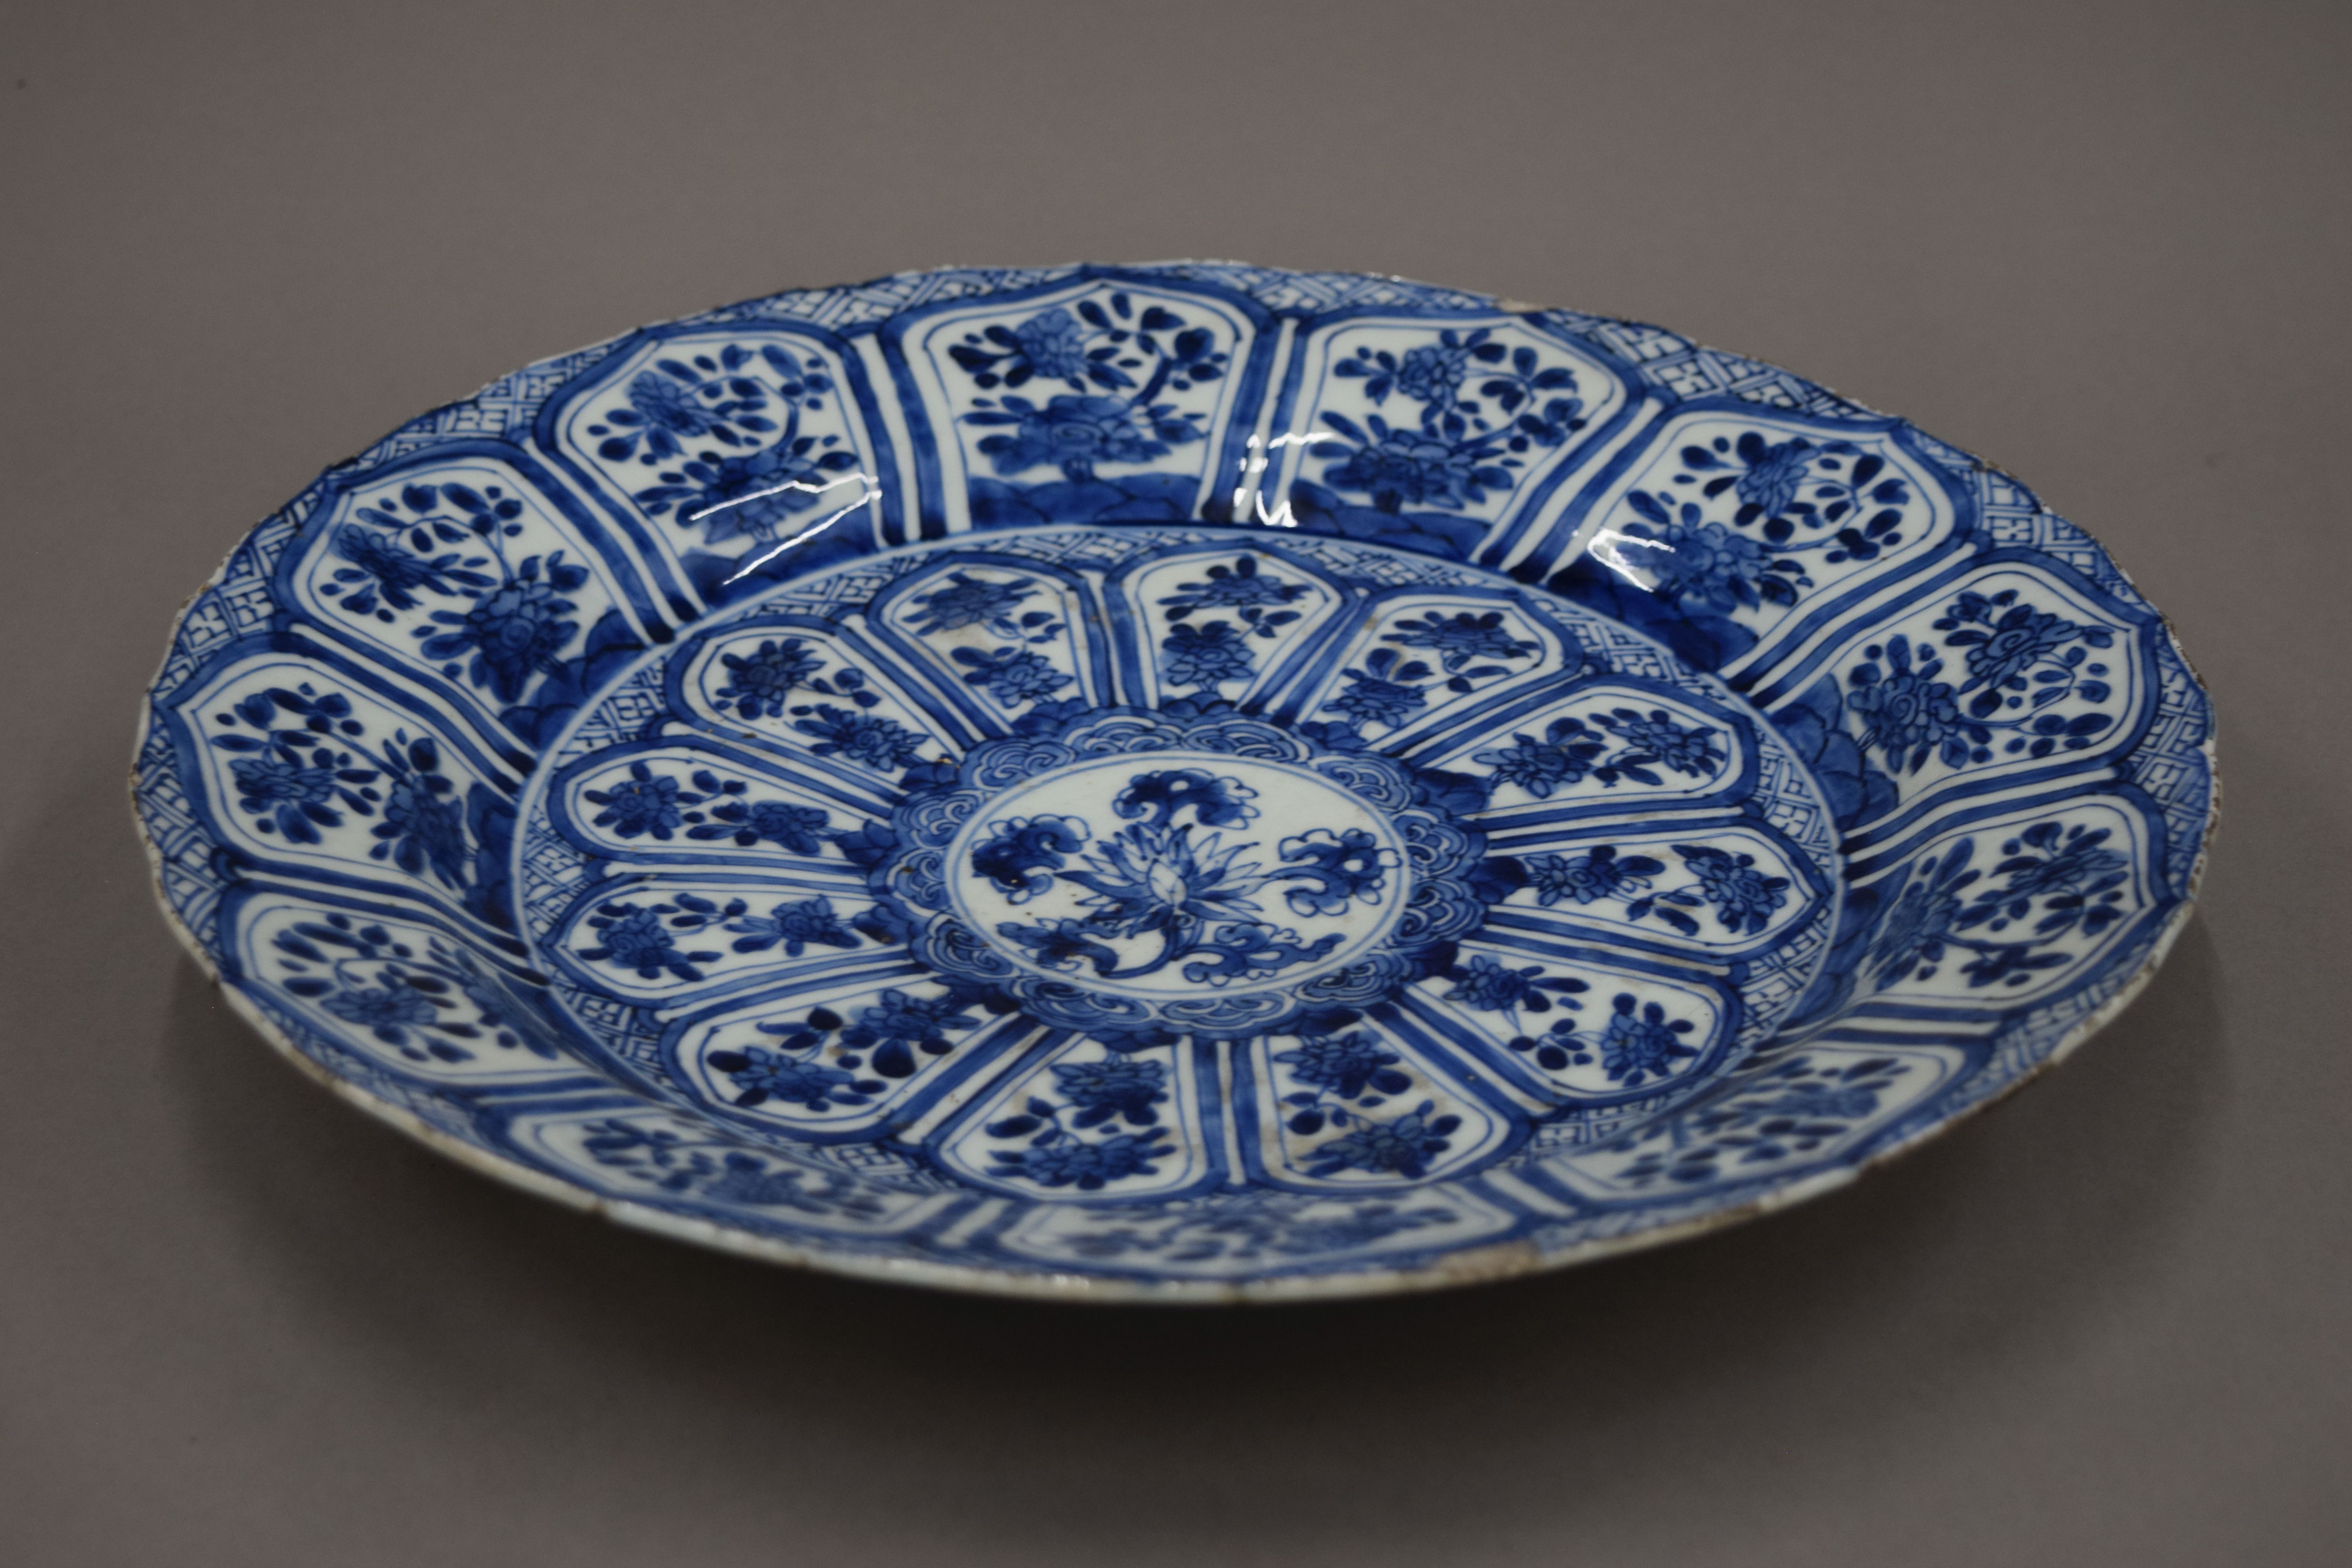 A 19th century Chinese blue and white porcelain plate. 35 cm diameter.